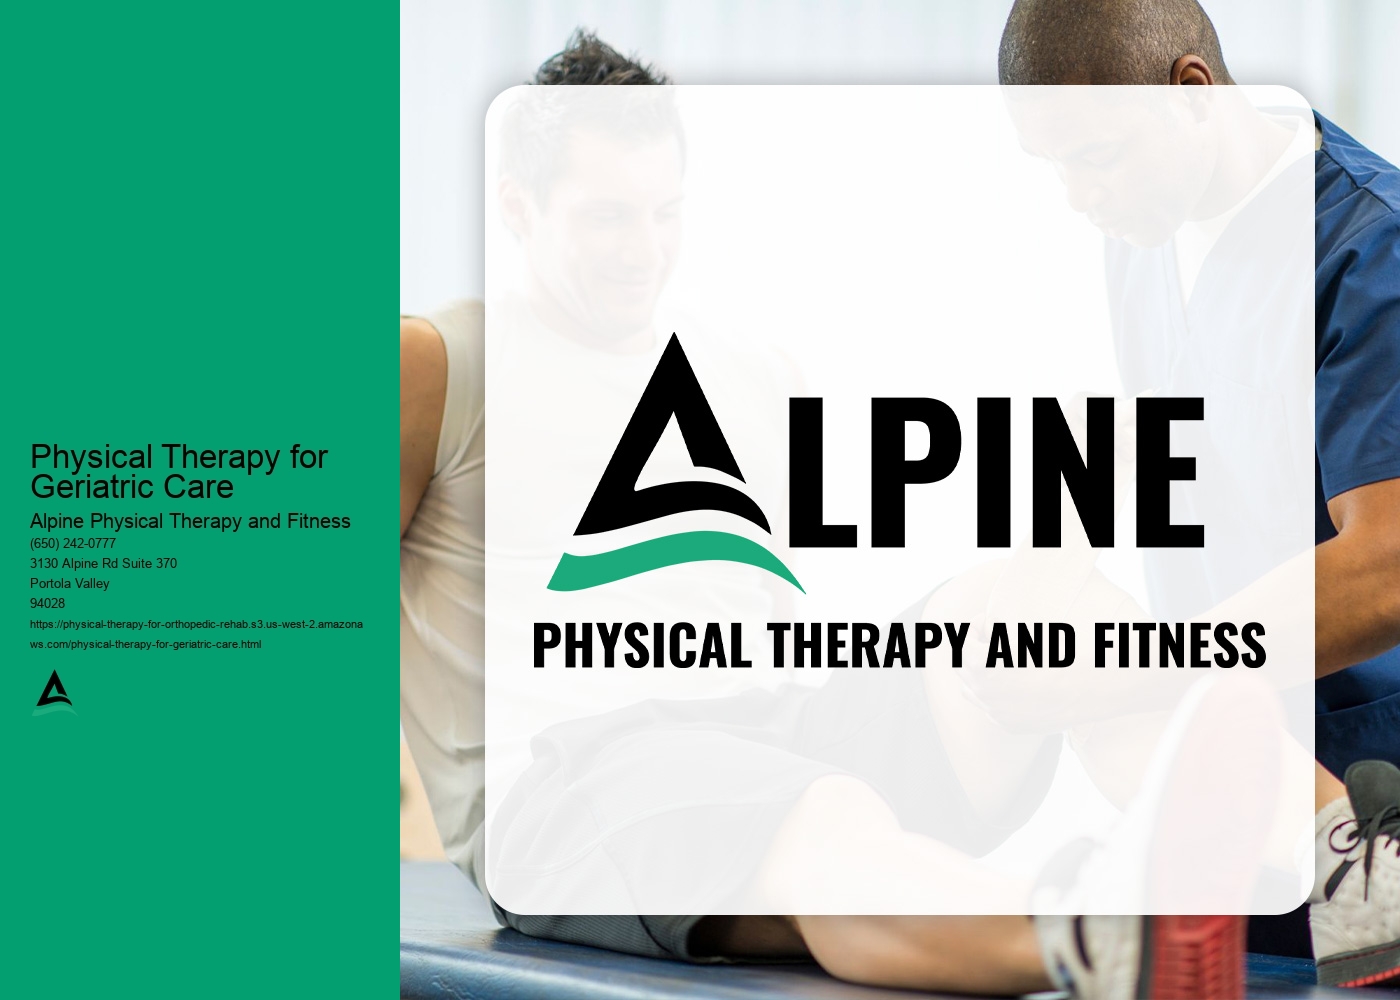 What should older adults expect during their first physical therapy session?